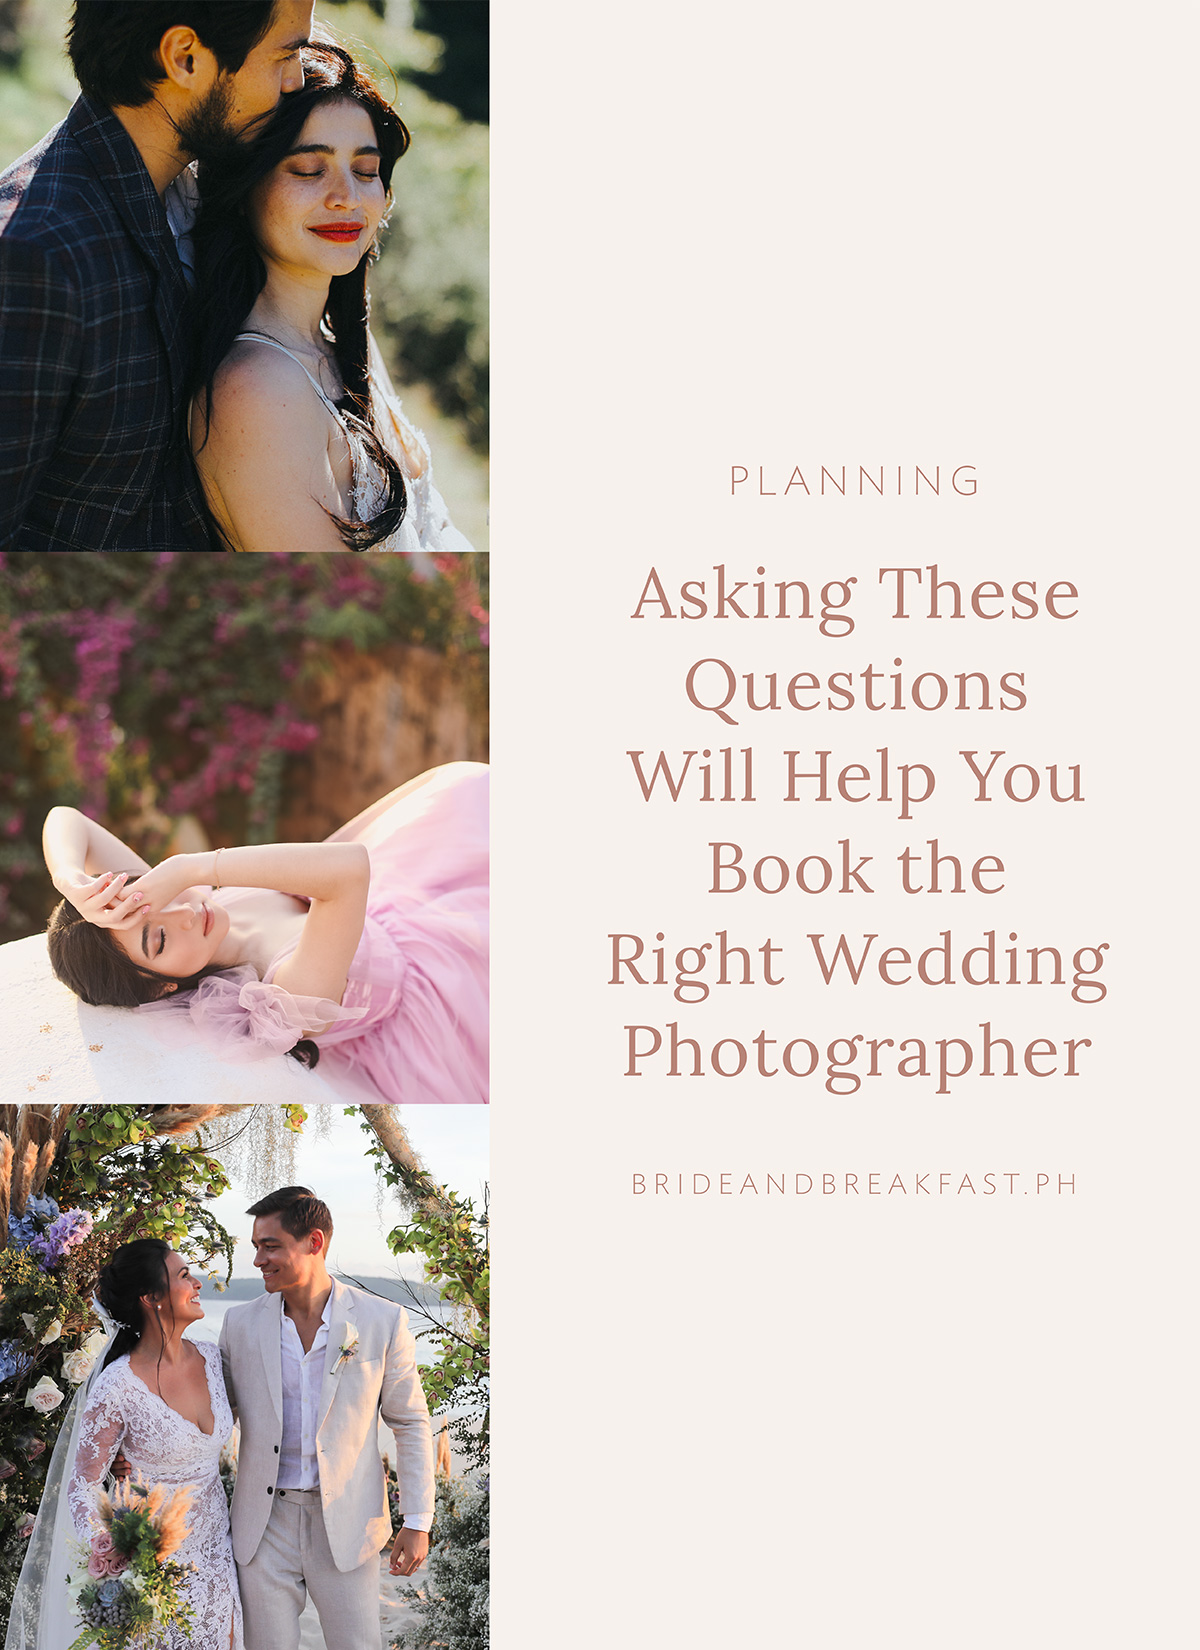 Asking these questions will help you book the right wedding photographer